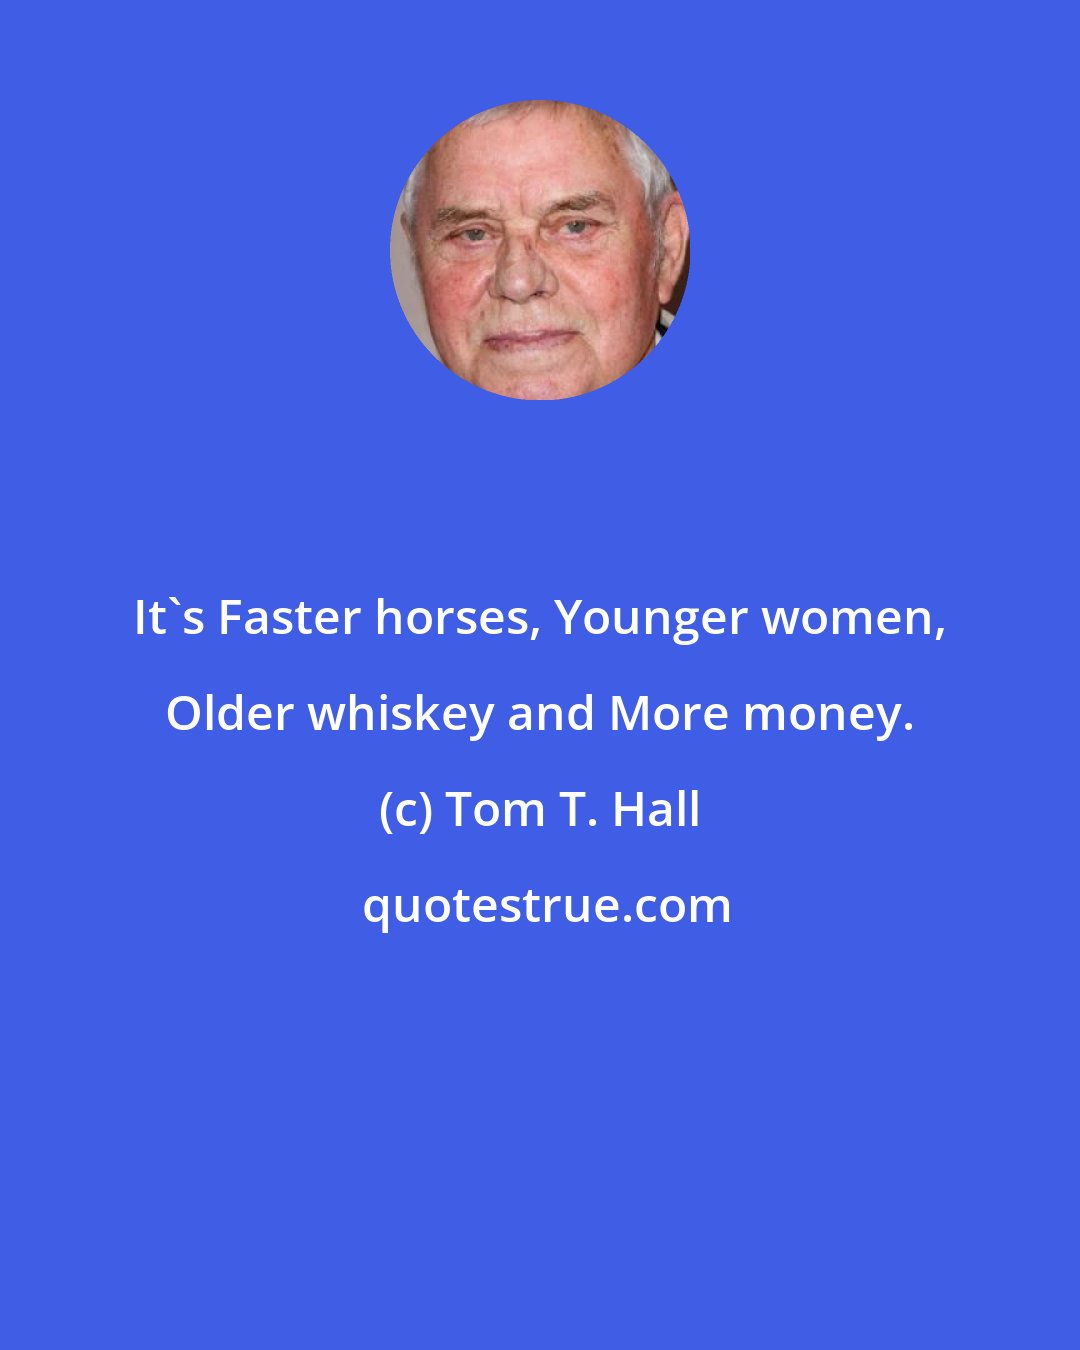 Tom T. Hall: It's Faster horses, Younger women, Older whiskey and More money.